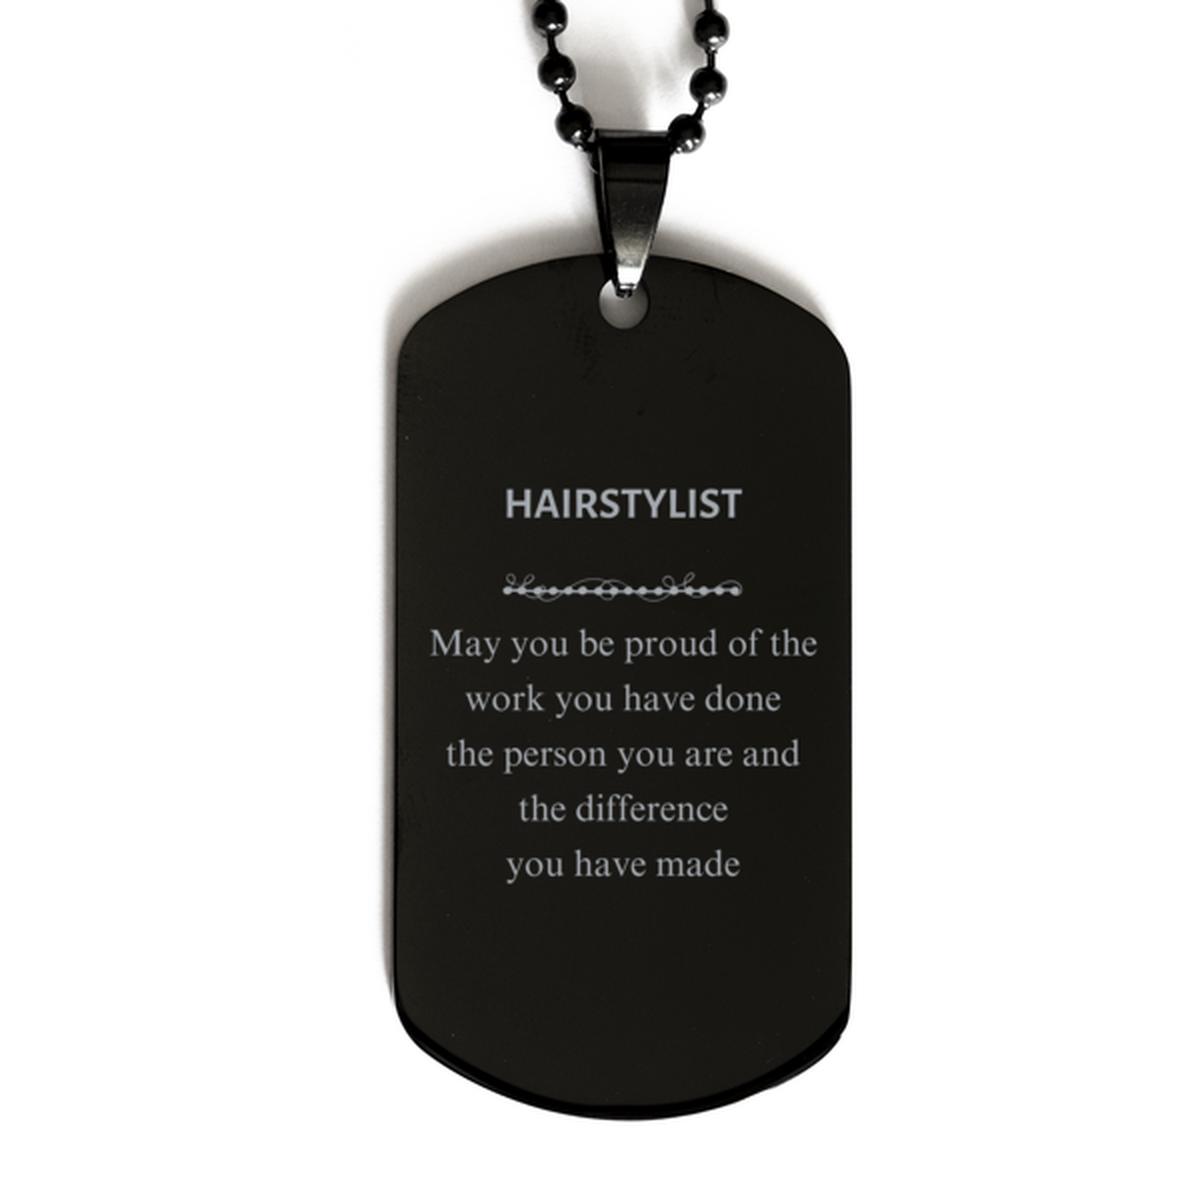 Hairstylist May you be proud of the work you have done, Retirement Hairstylist Black Dog Tag for Colleague Appreciation Gifts Amazing for Hairstylist